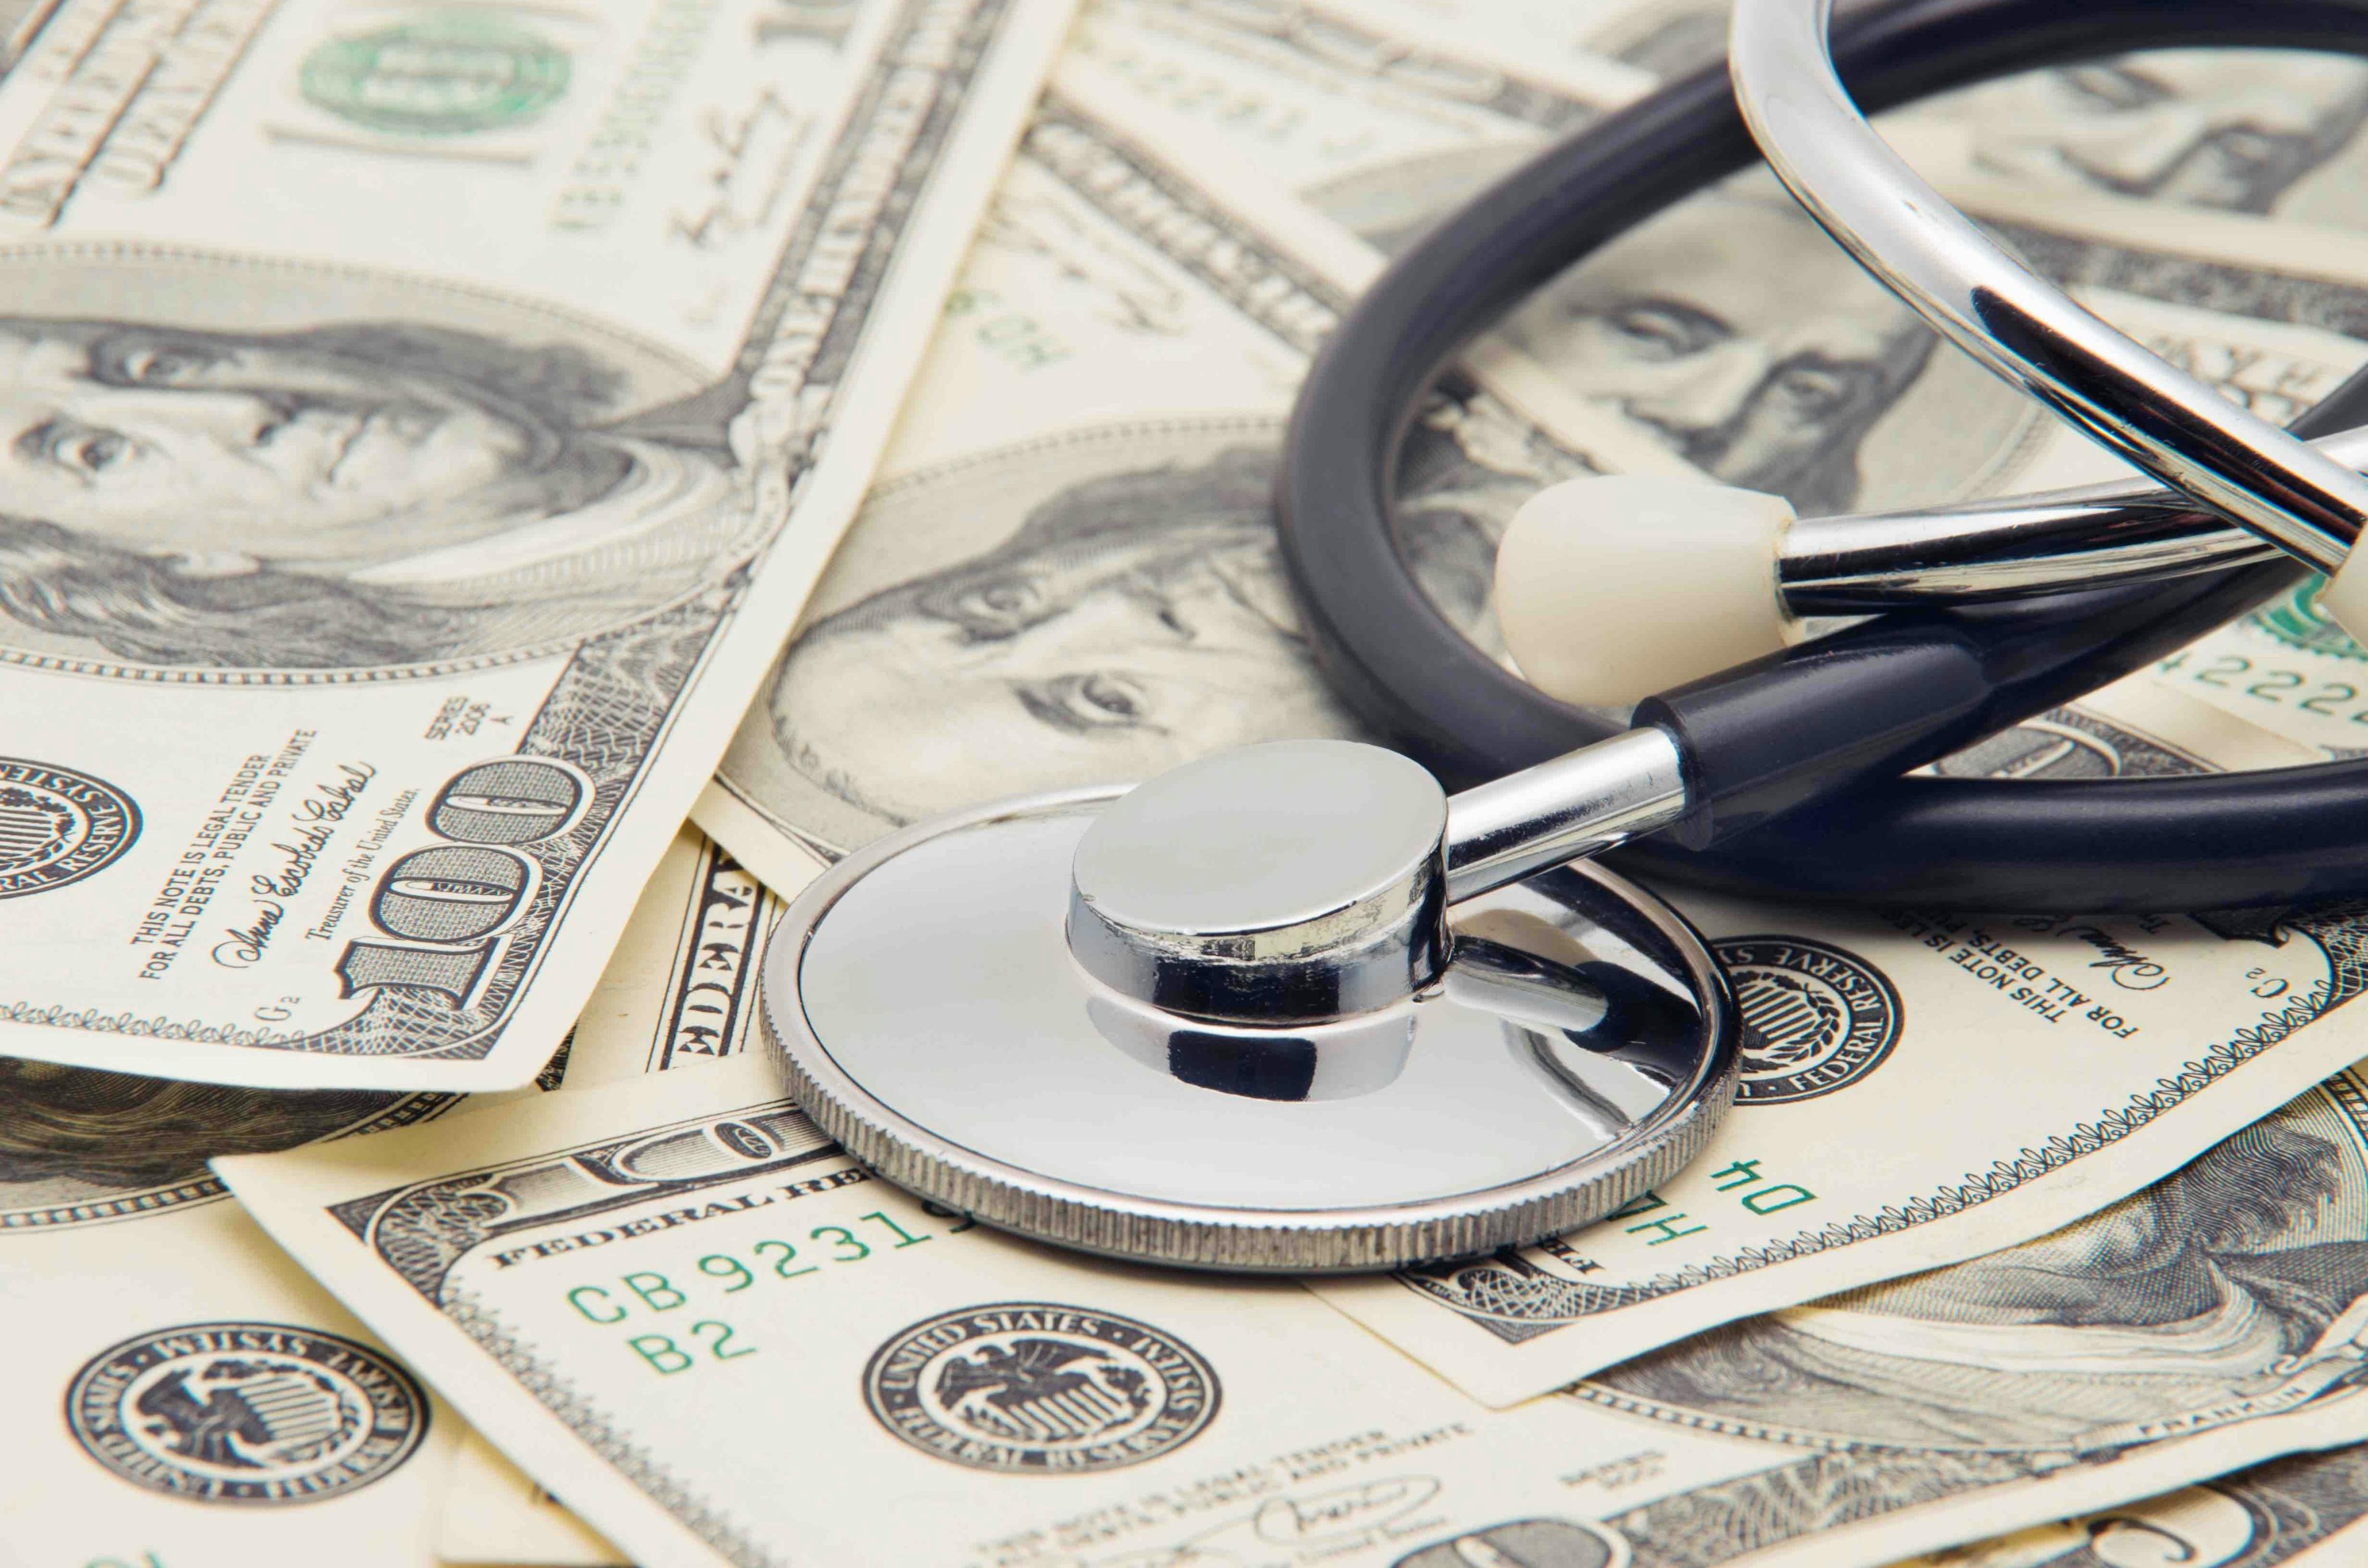 Health care and payment | Image credit: nata777_7 - stock.adobe.com